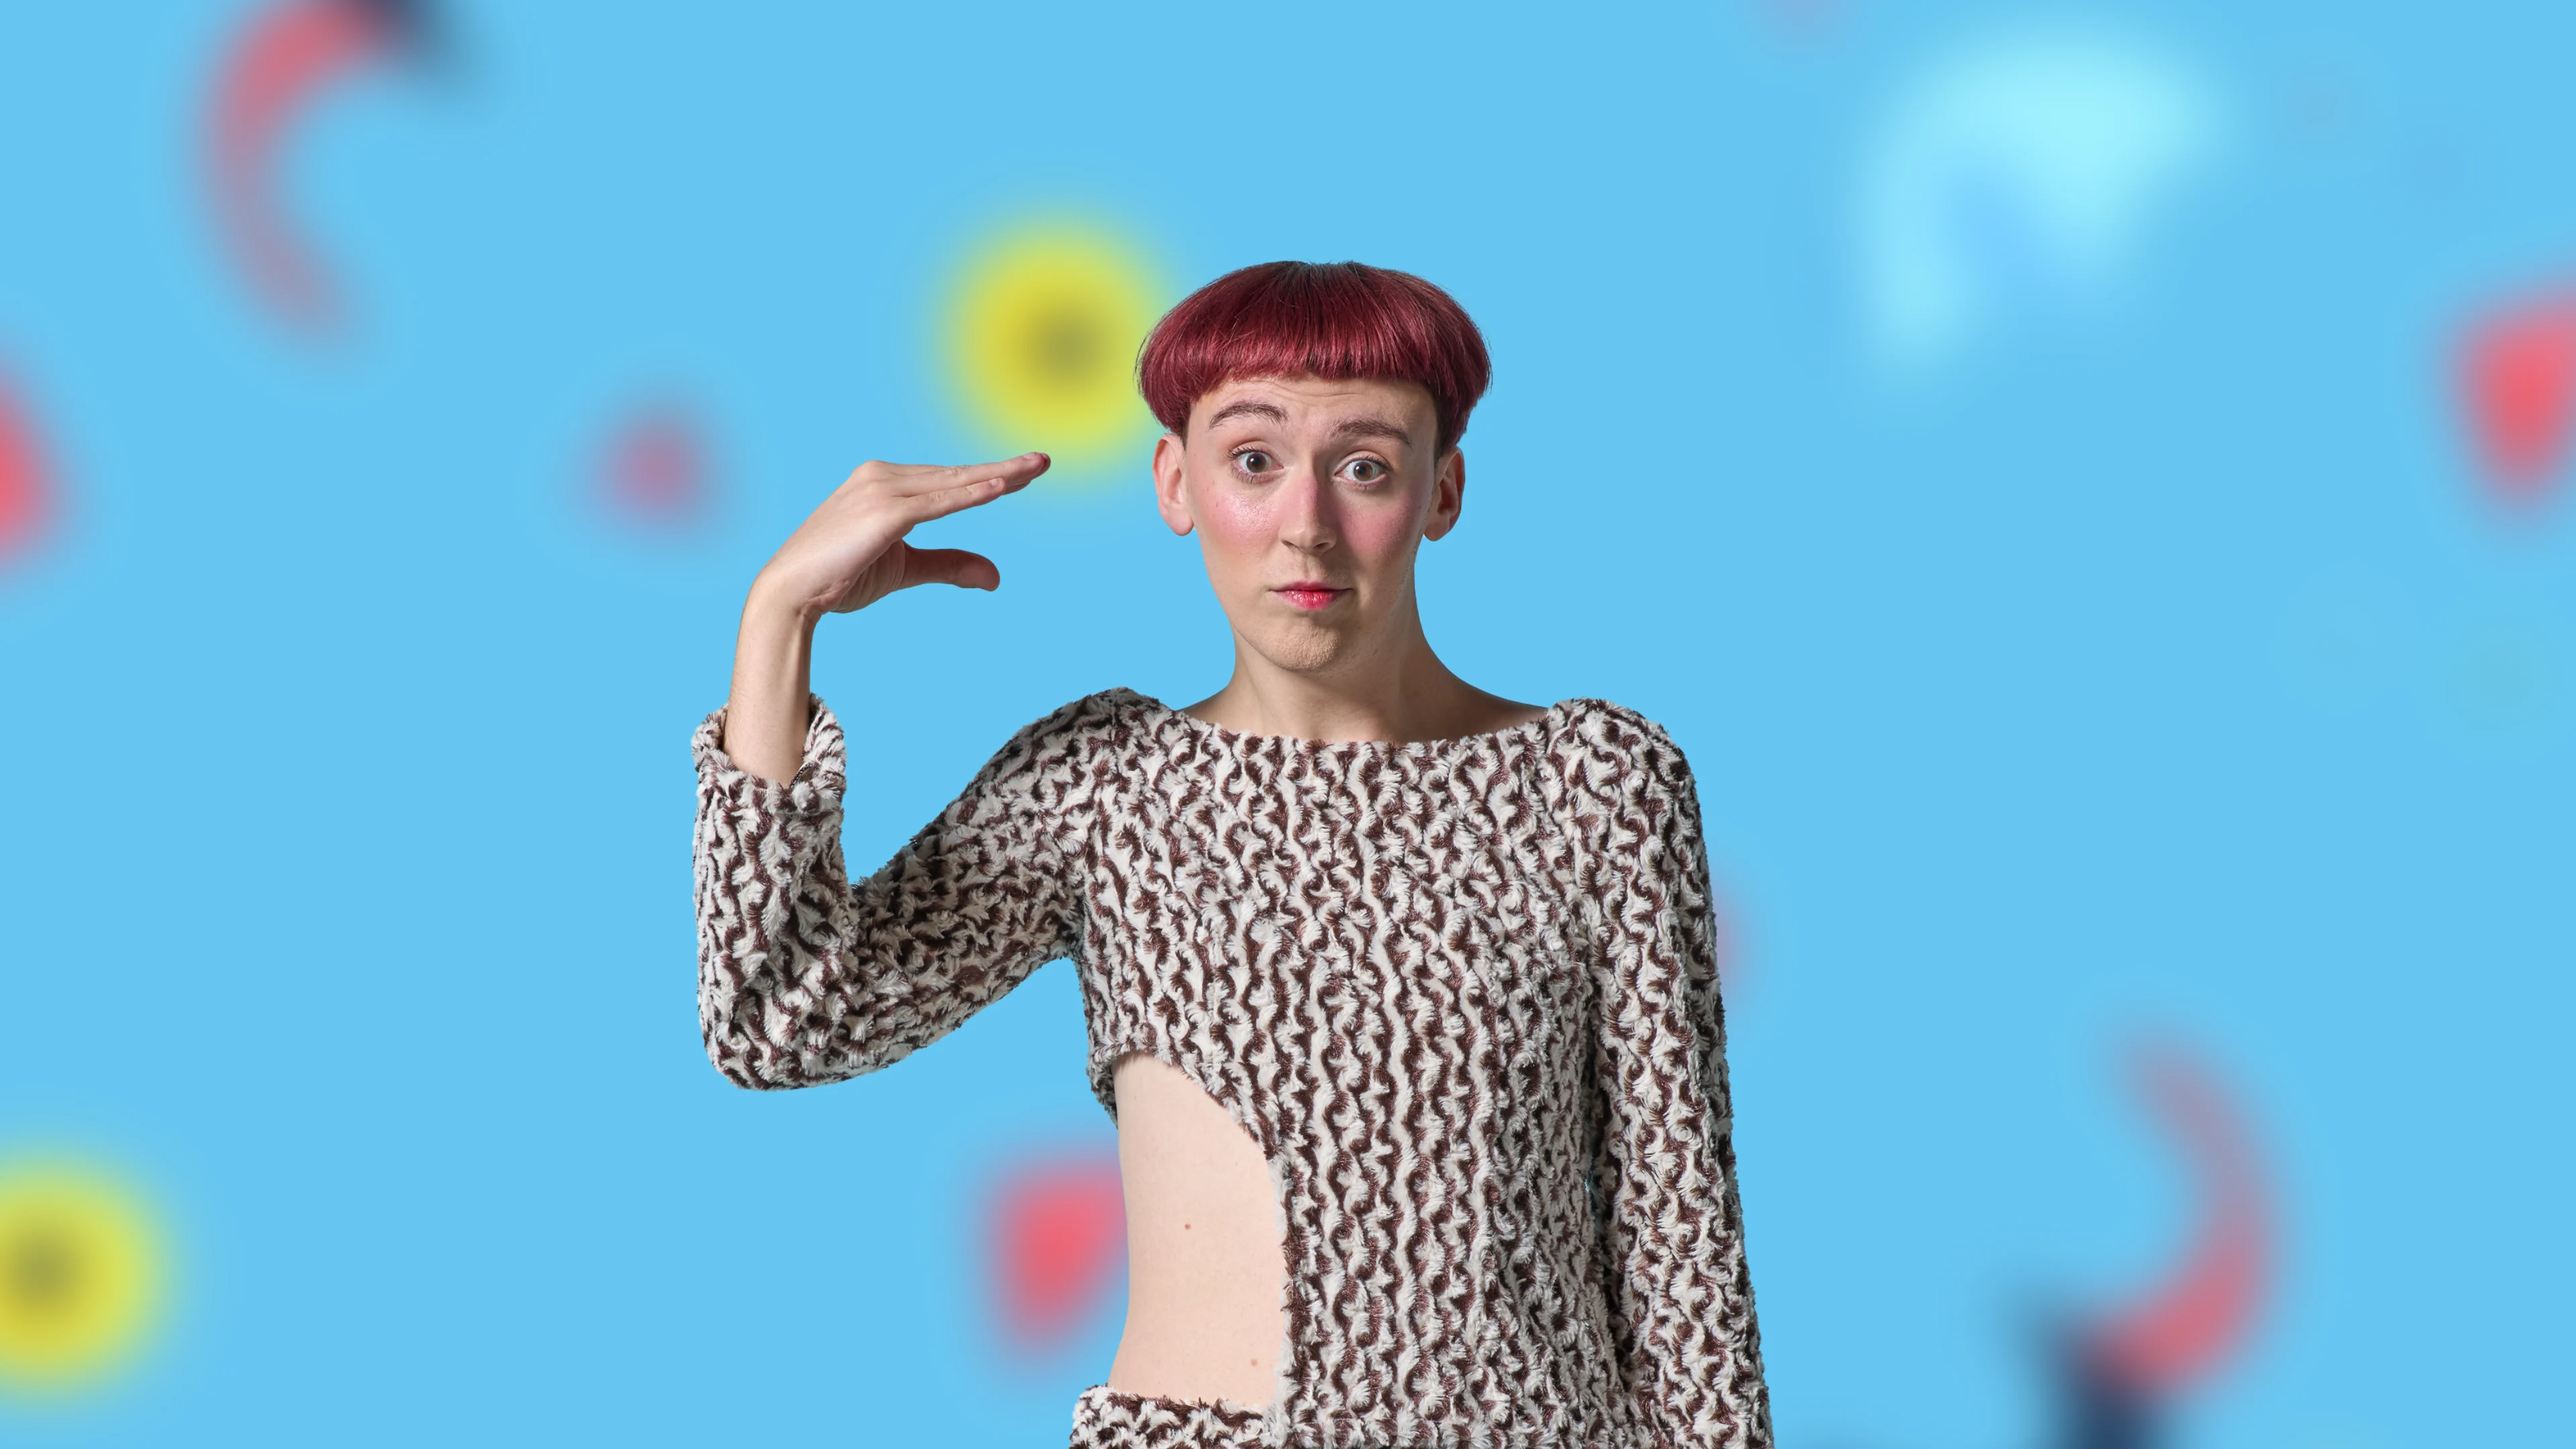 Voice for Comedy Performance - Comedy Workshop Poster showing the teacher in a pose with a blue background